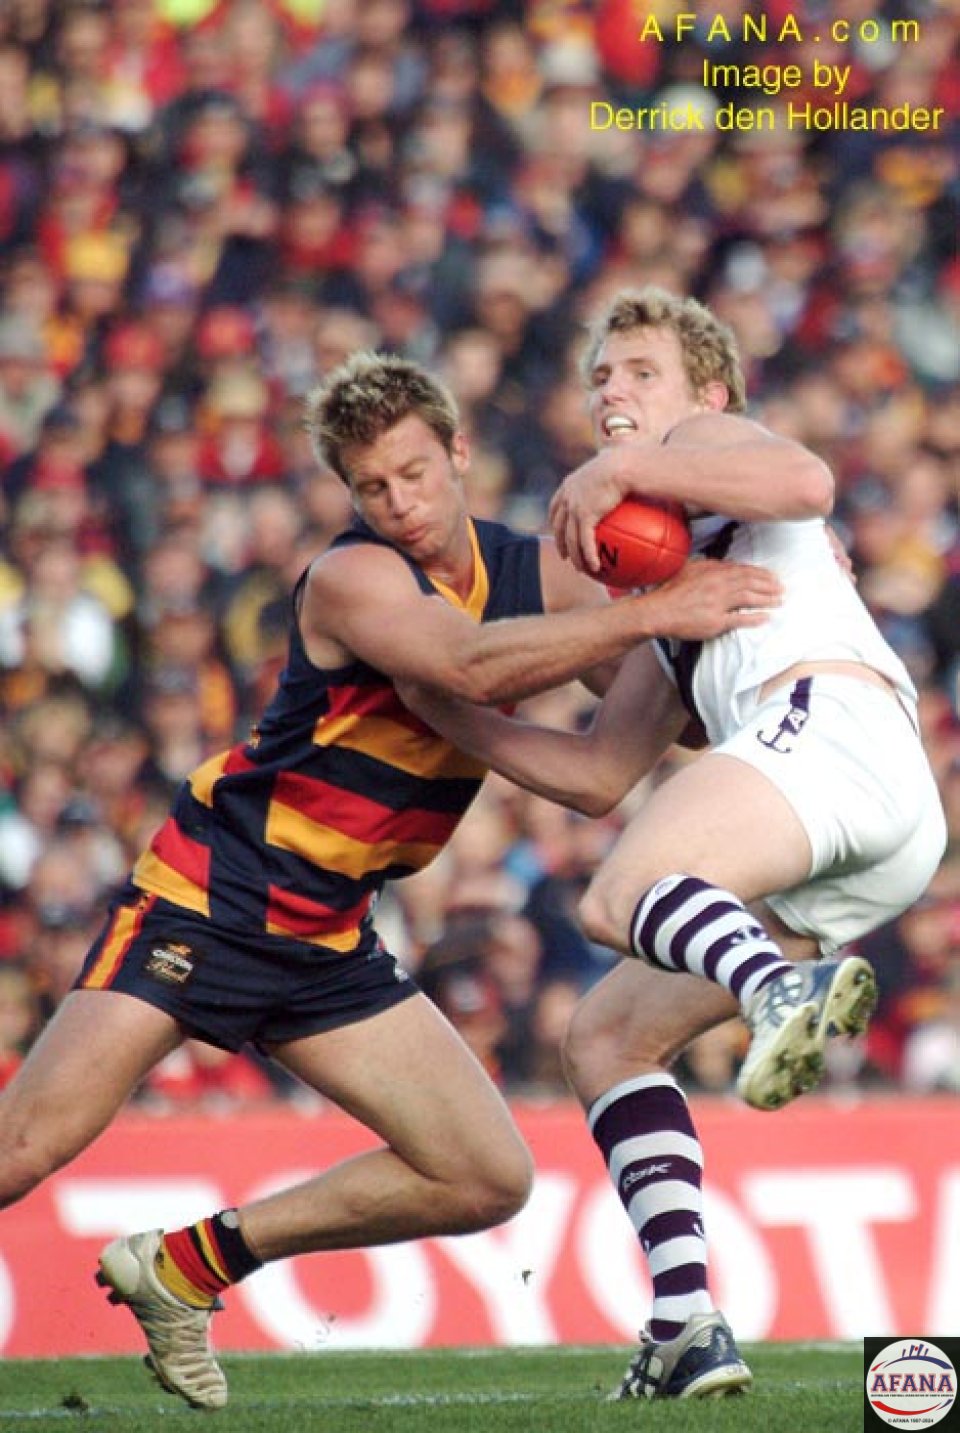 [b]Late in the game the Crows forwards exhibited great pressure on the Dockers in keeping the ball in their forward zone[/b]